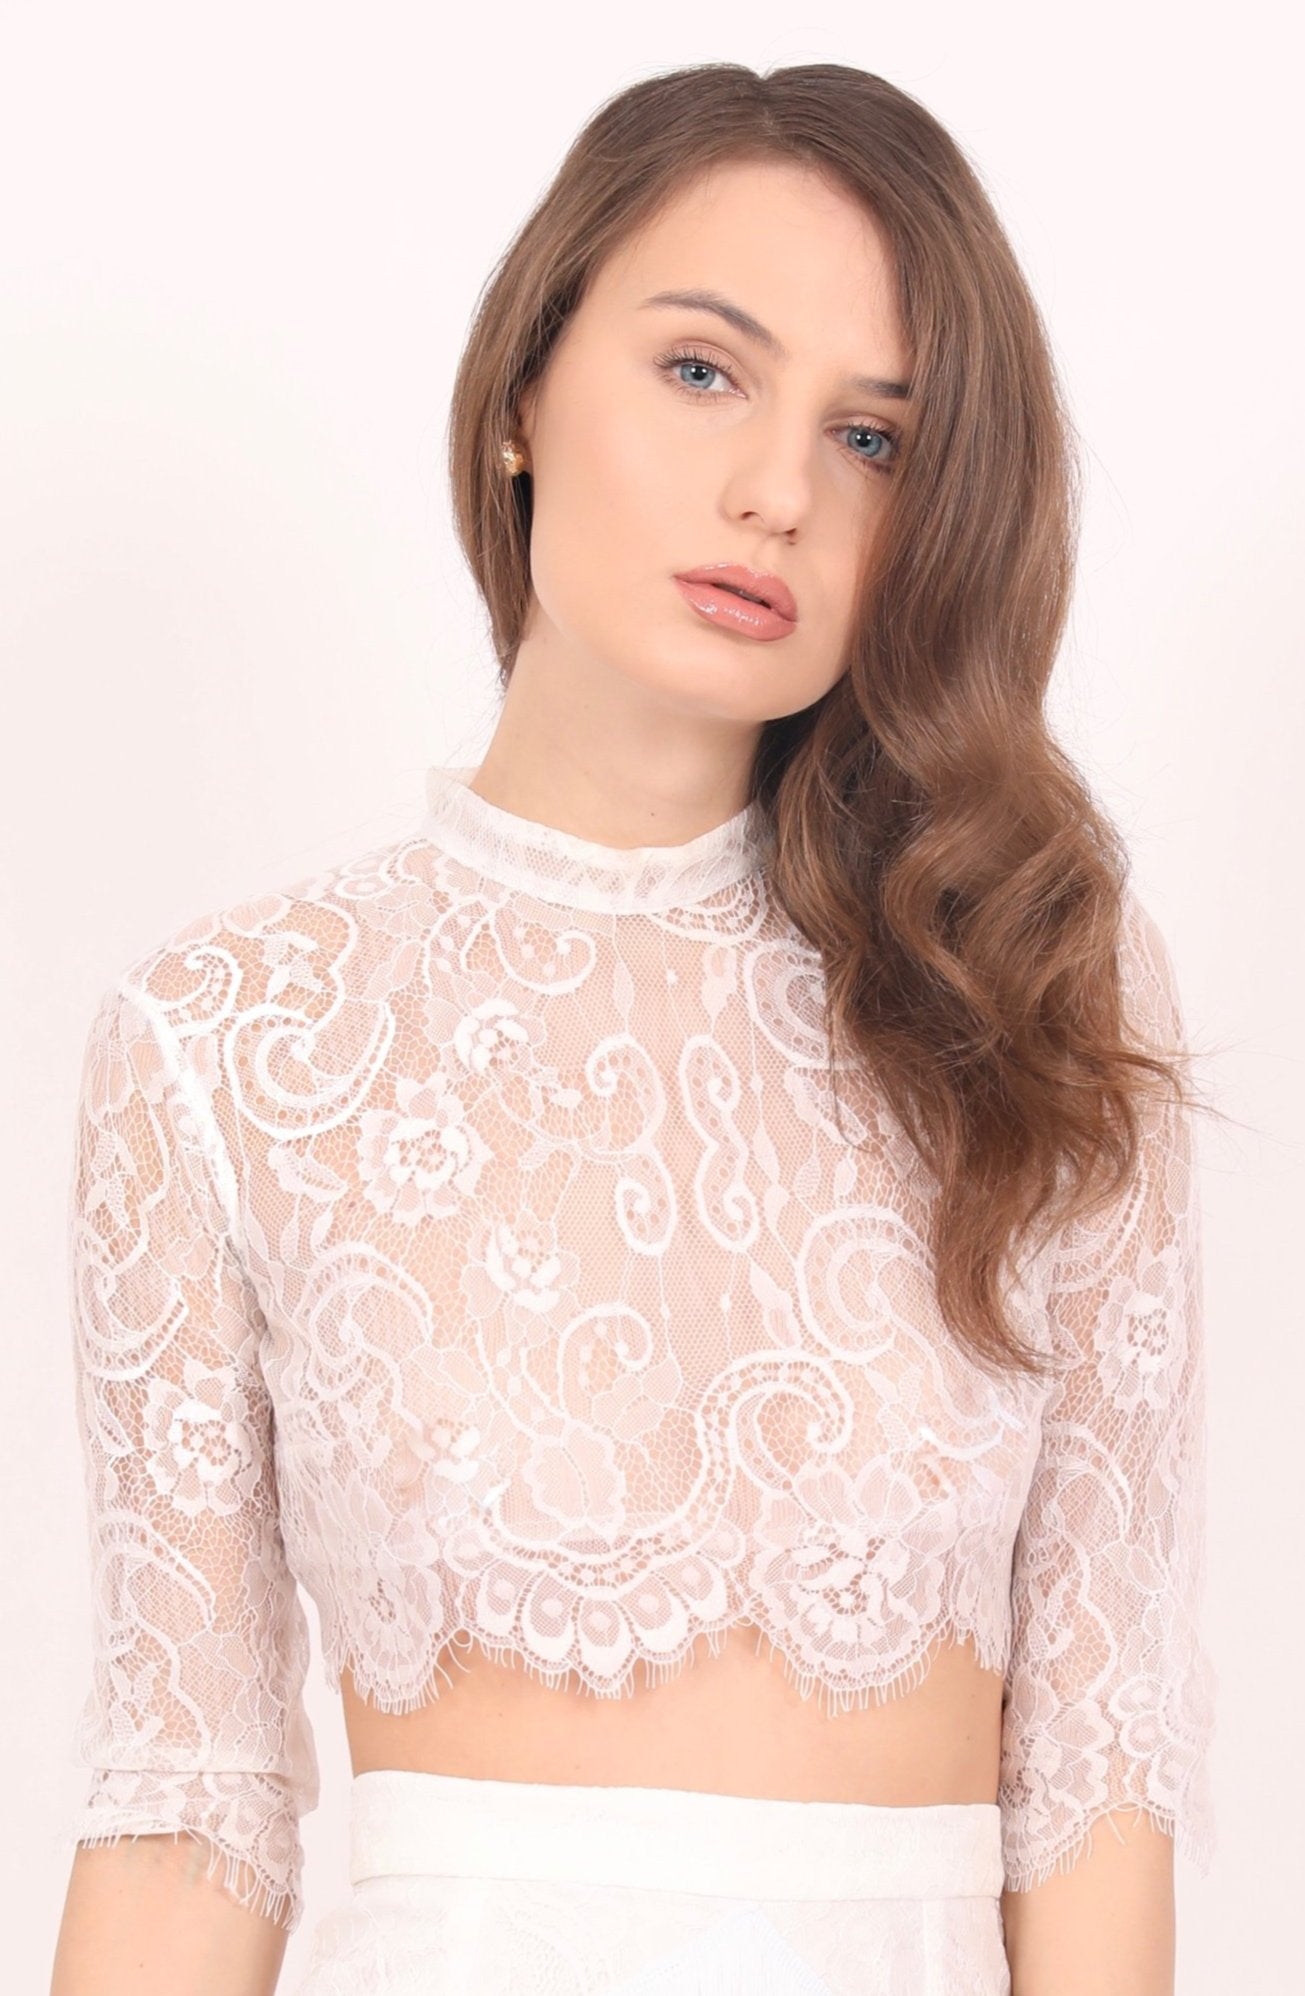 Daisy sheer white chantilly lace crop top